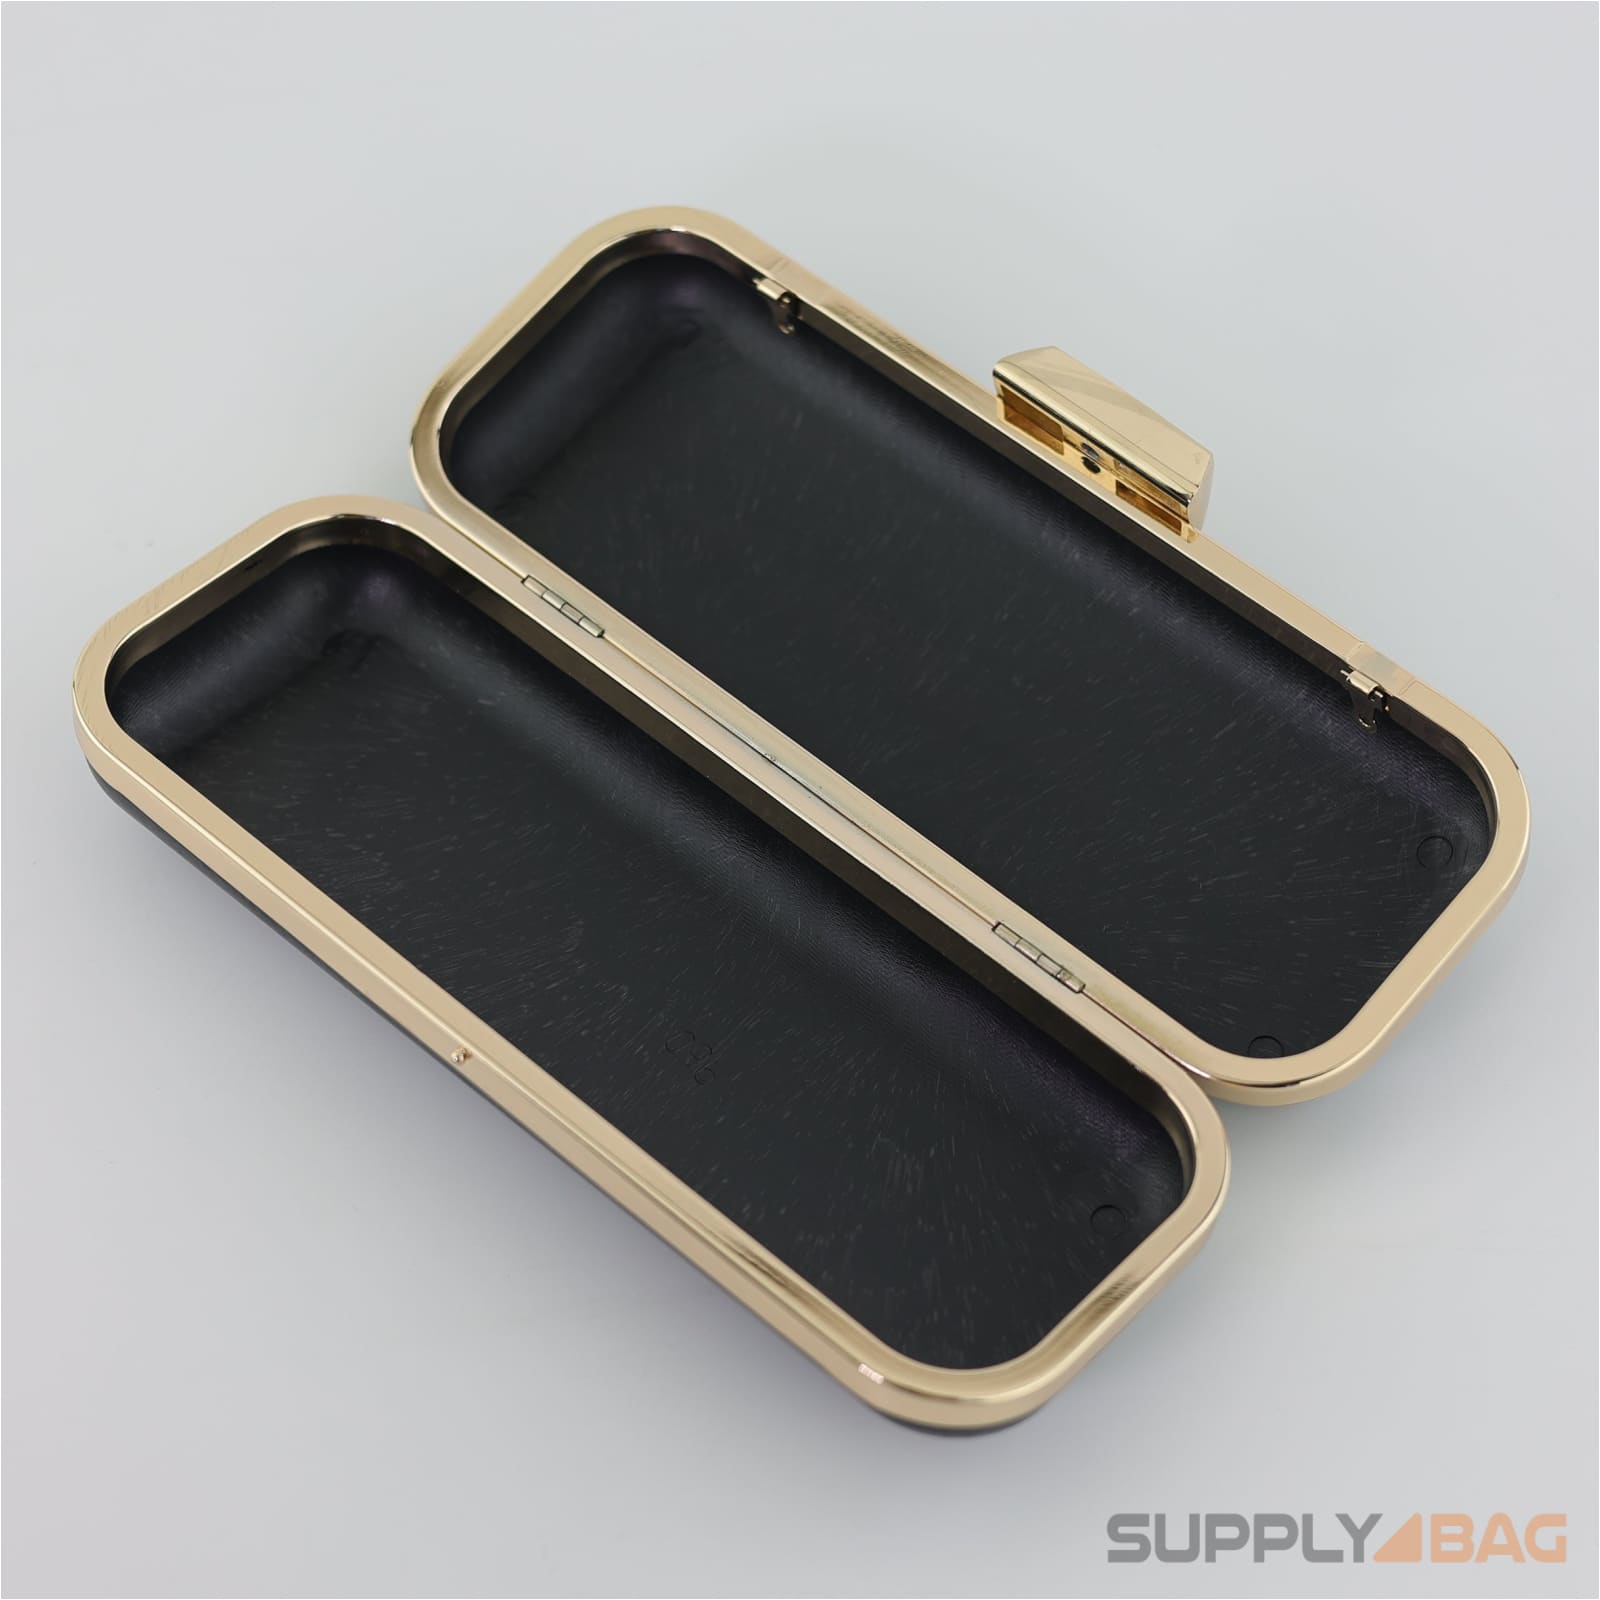 9 x 3 3/8 inch - gold large clamshell clutch frame with covers